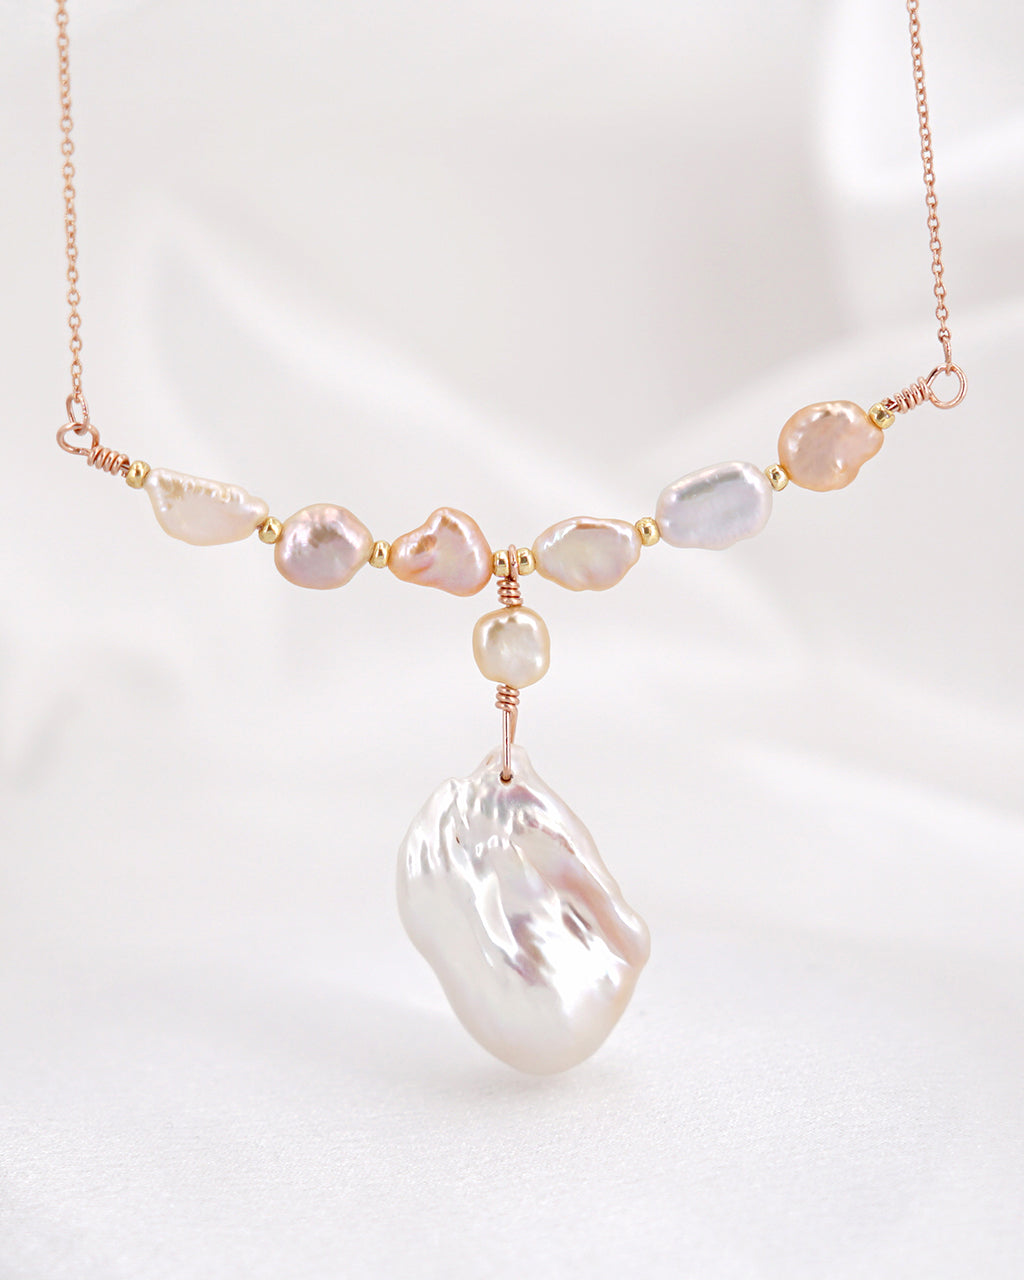 Iridescent White Baroque Pearl Necklace - Y-drop - Wedding Bridal Jewelry for Brides and Bridesmaids | Singapore